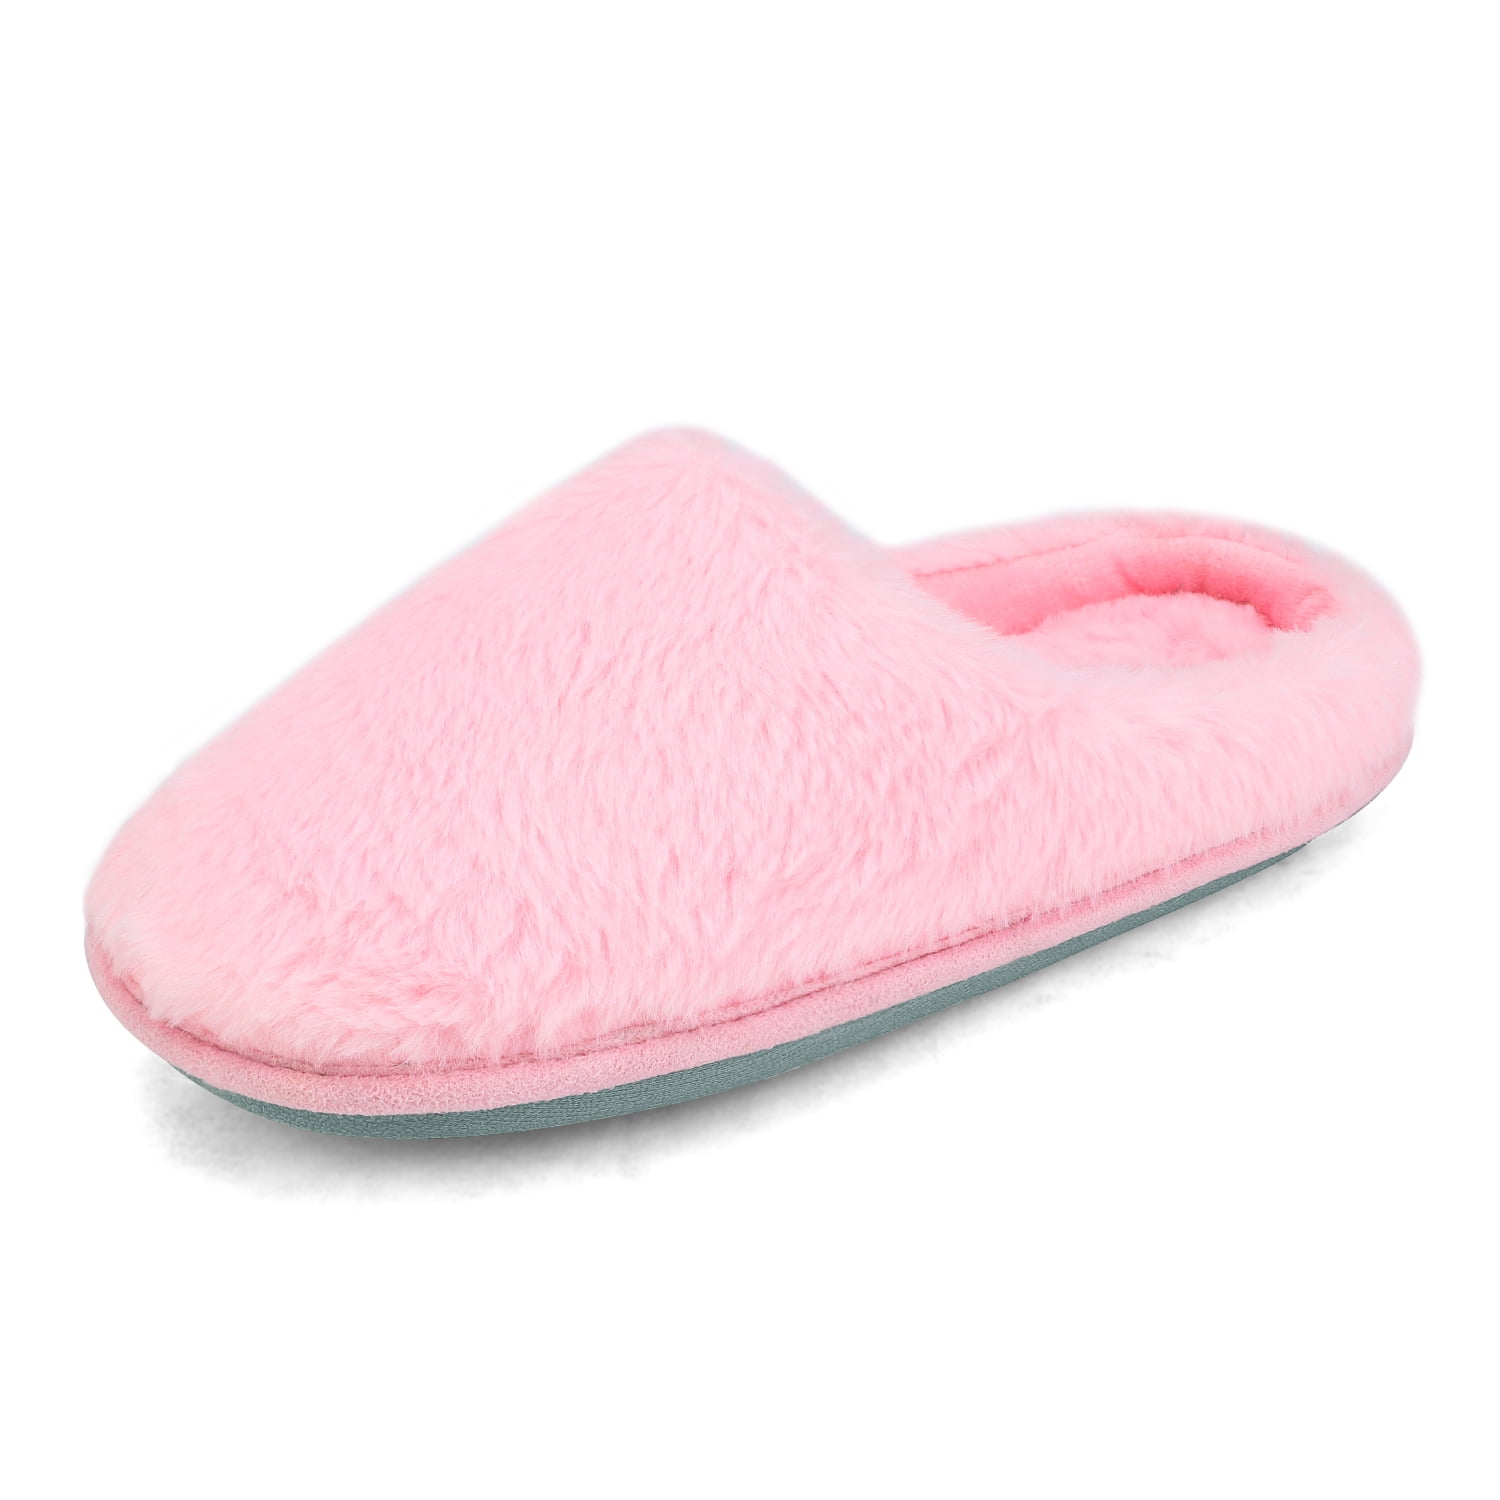 winter house slippers